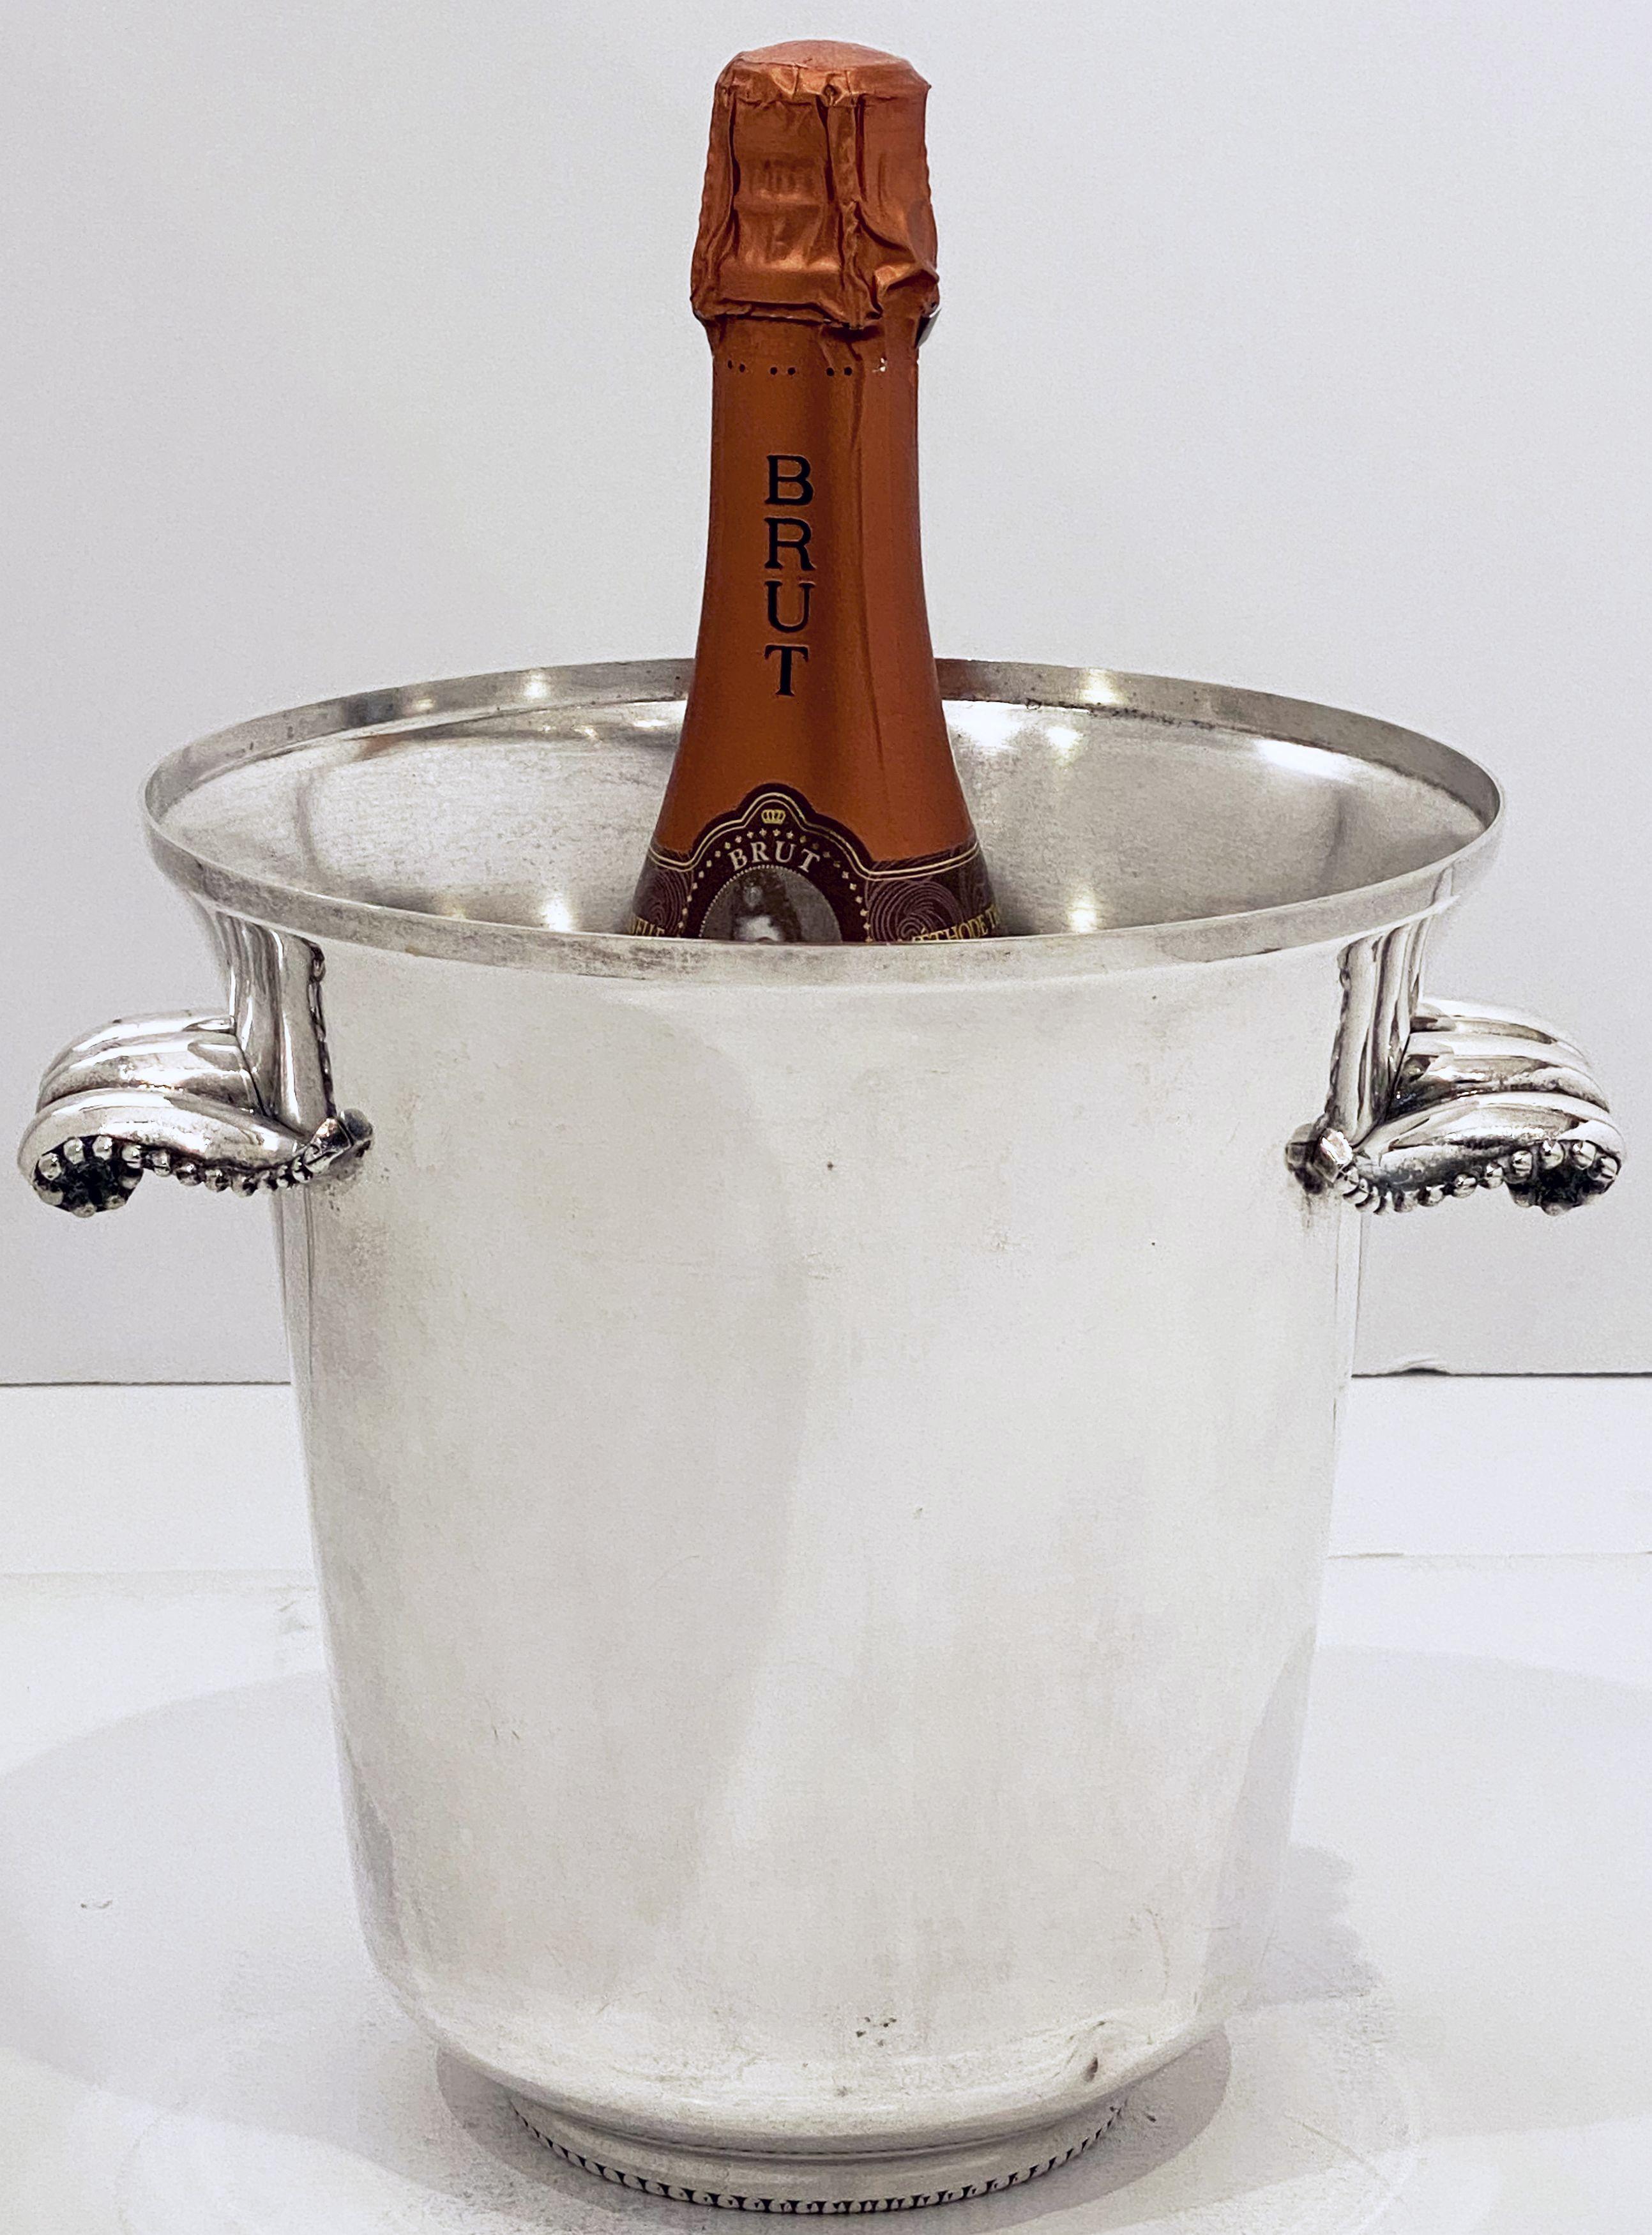 A French champagne bucket or wine cooler of fine plate silver, featuring a flared edge top, two stylish opposing handles, and an elegantly tapering body. 

Impressed hallmark on base.

Dimensions are 

H - 8 1/4 inches
Diameter of opening - 8